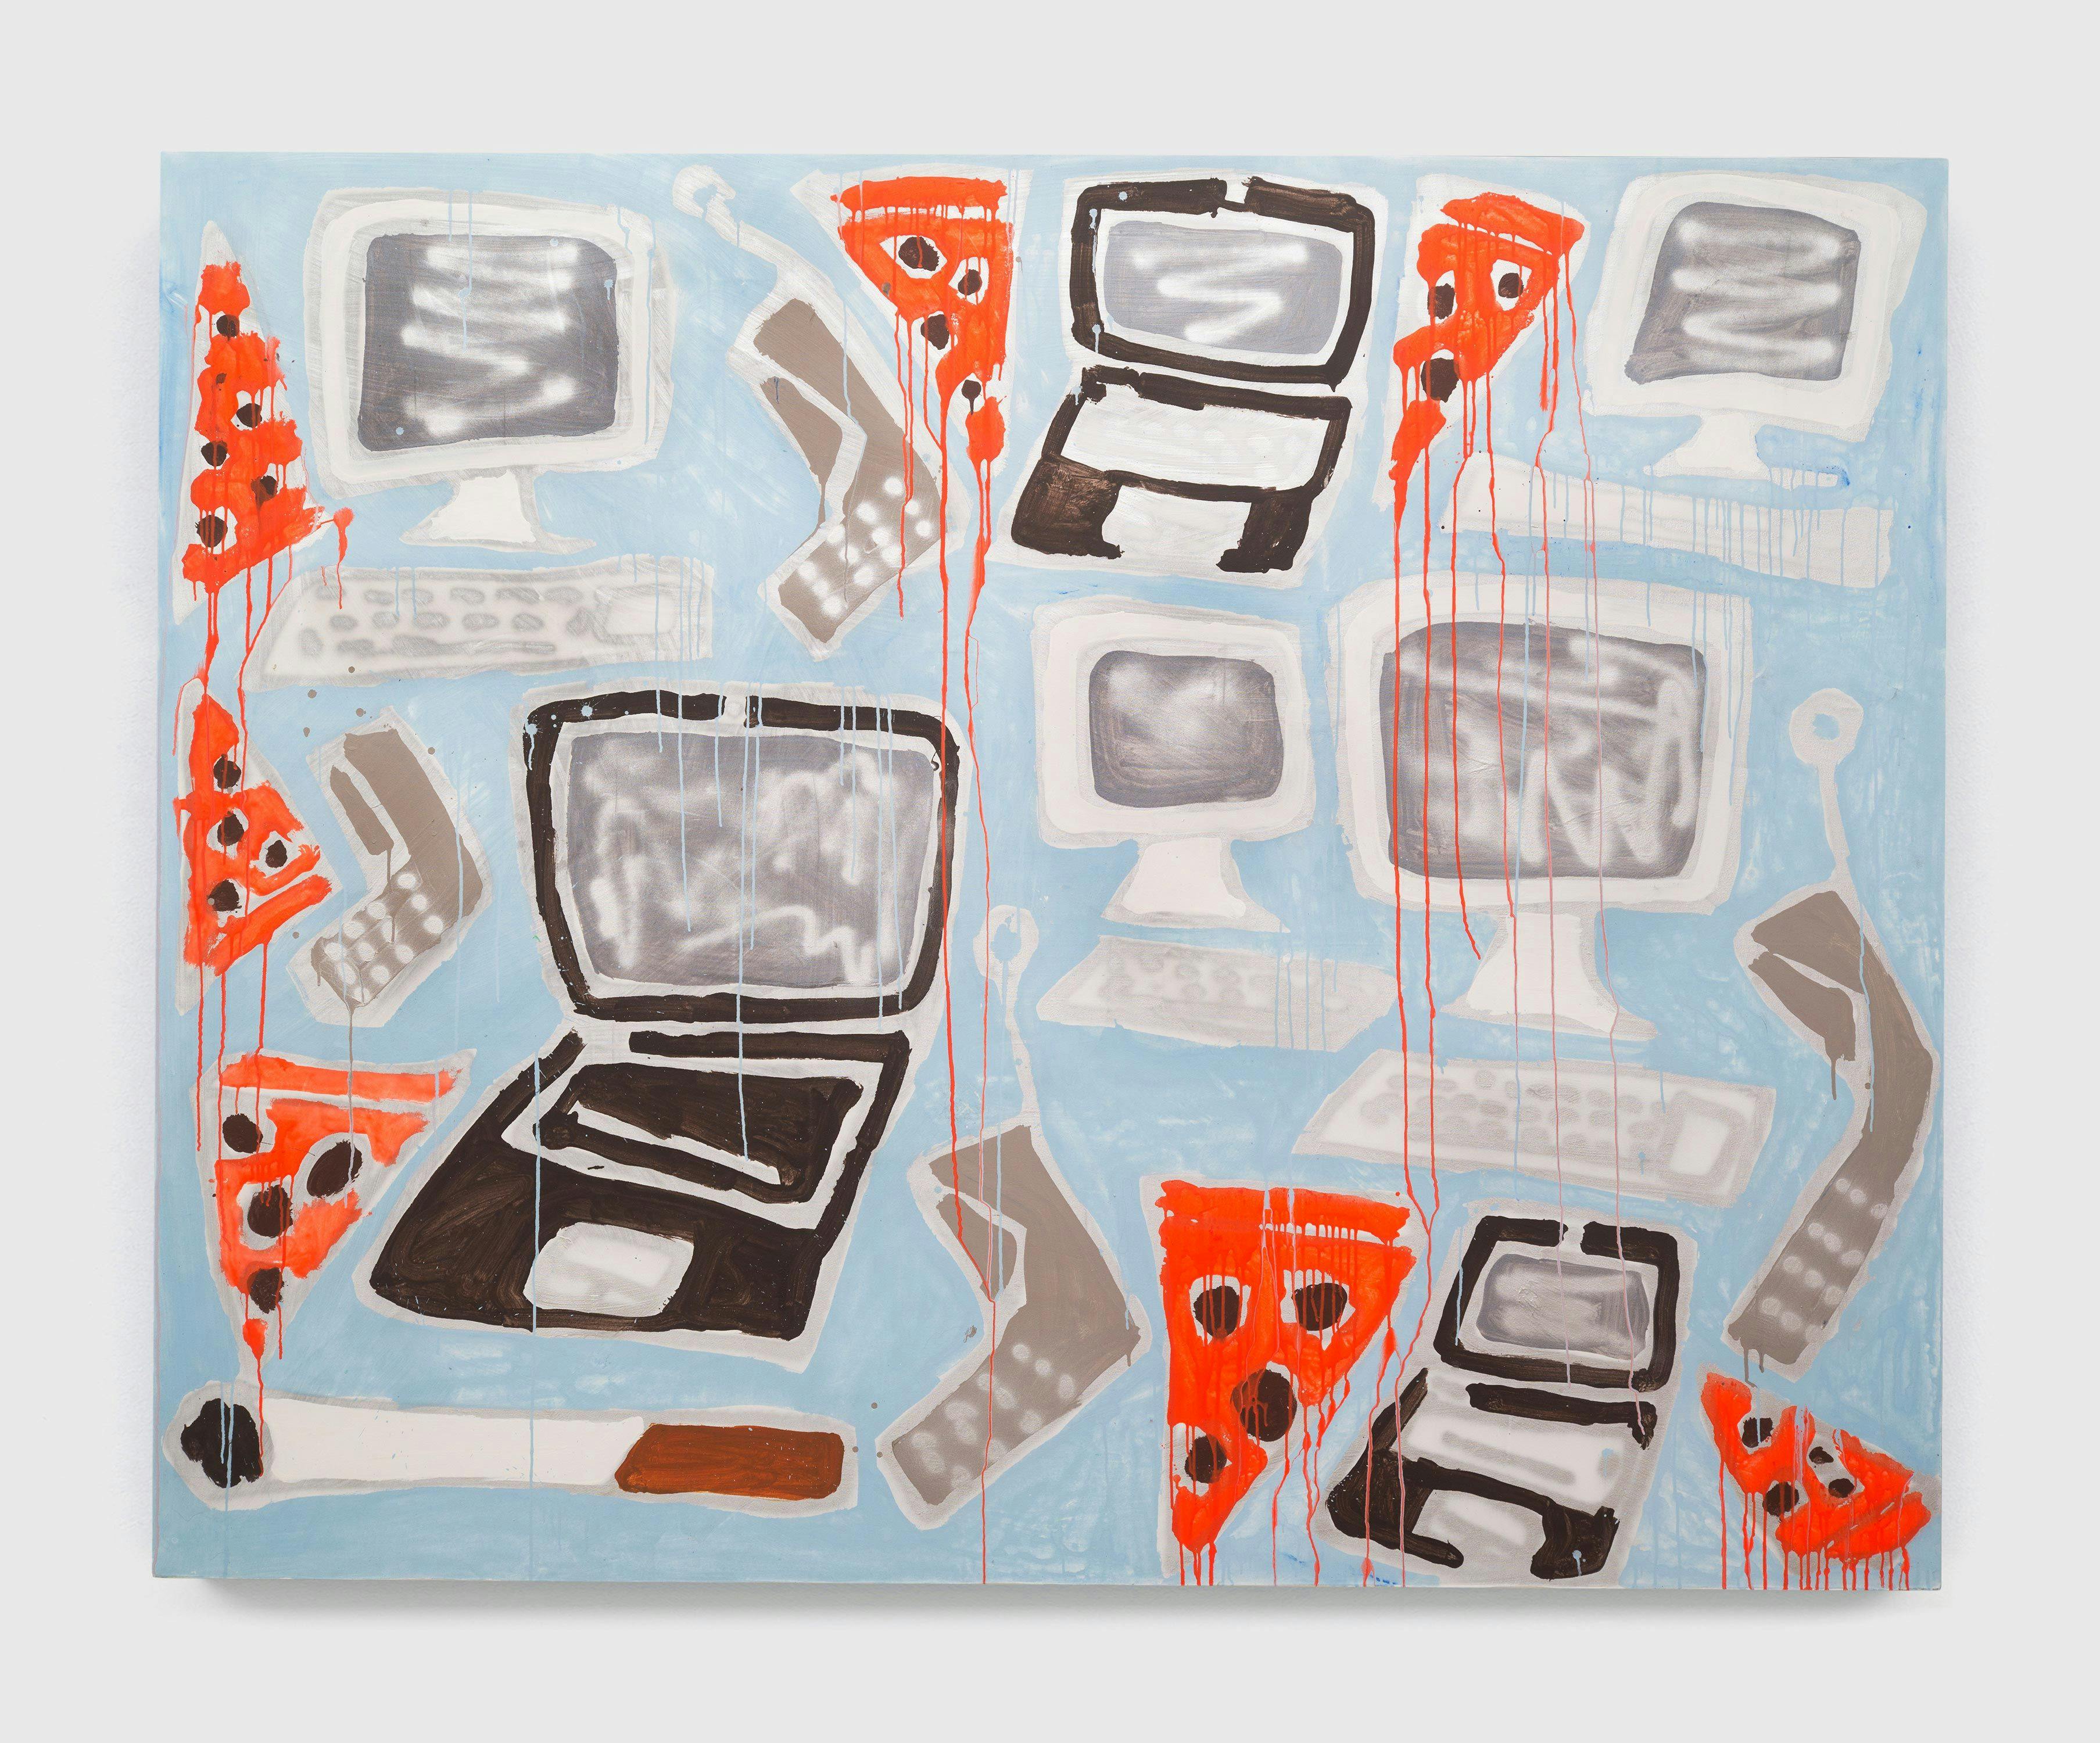 A painting by Katherine Bernhardt, titled Study Session / Computers, Laptops, Cell phones, Pizza and a Cigarette, dated 2013.